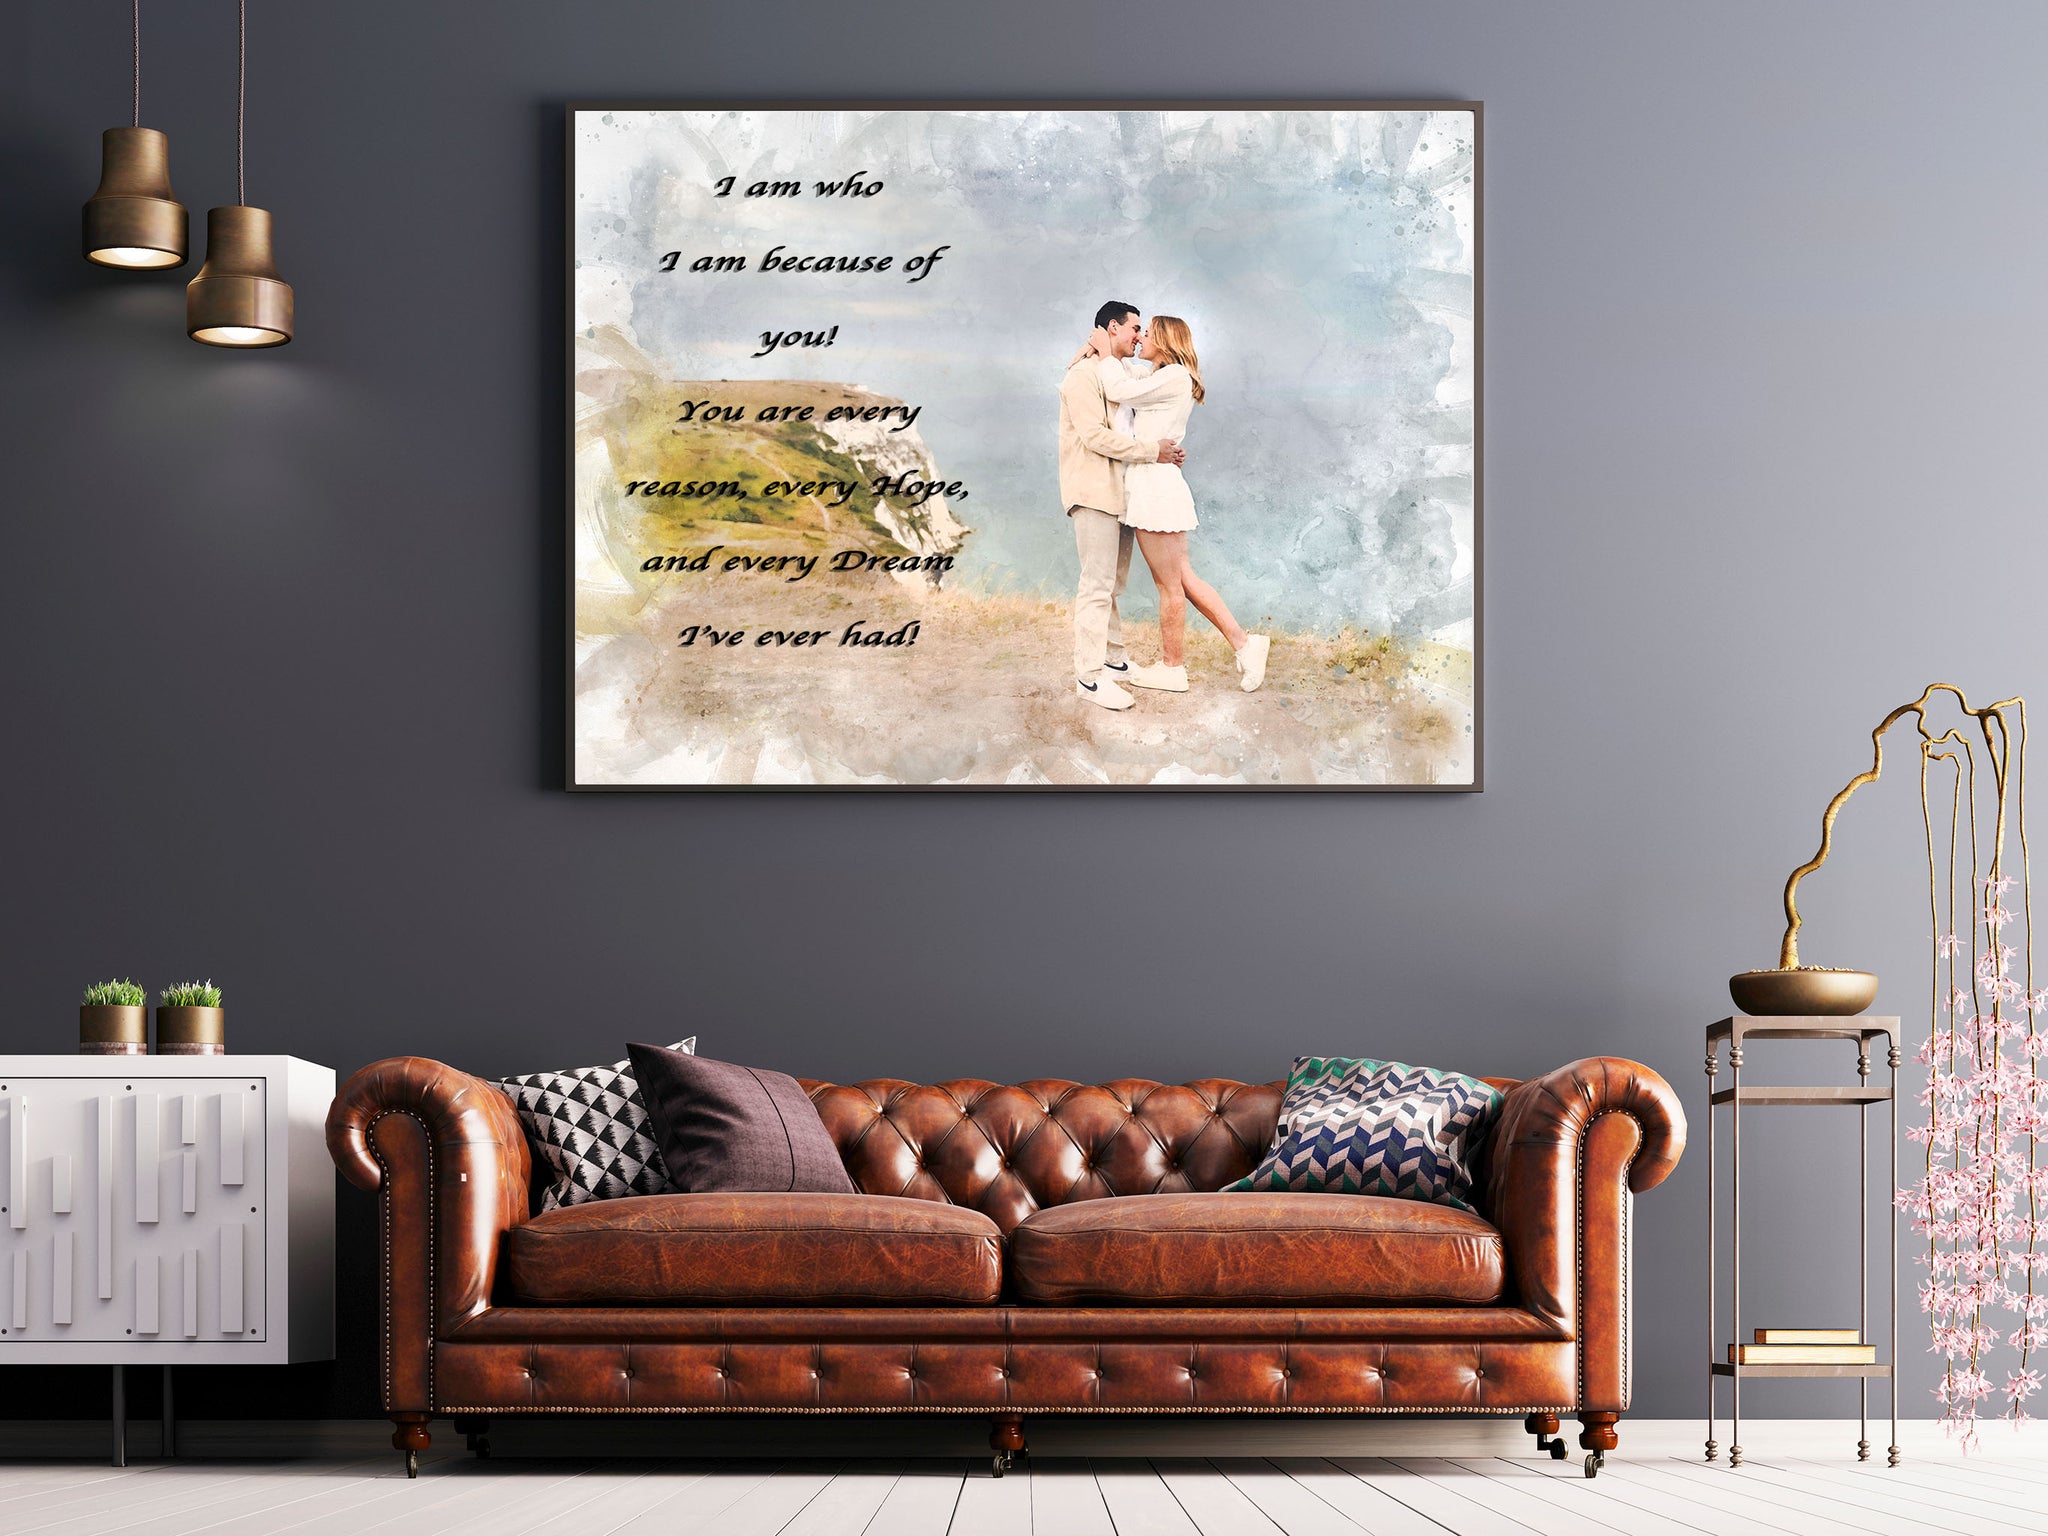  Turn Your Engagement Photo into a Romantic Wedding Gift Idea  | Custom Wedding Gift from your Engagement Picture 18 - FromPicToArt